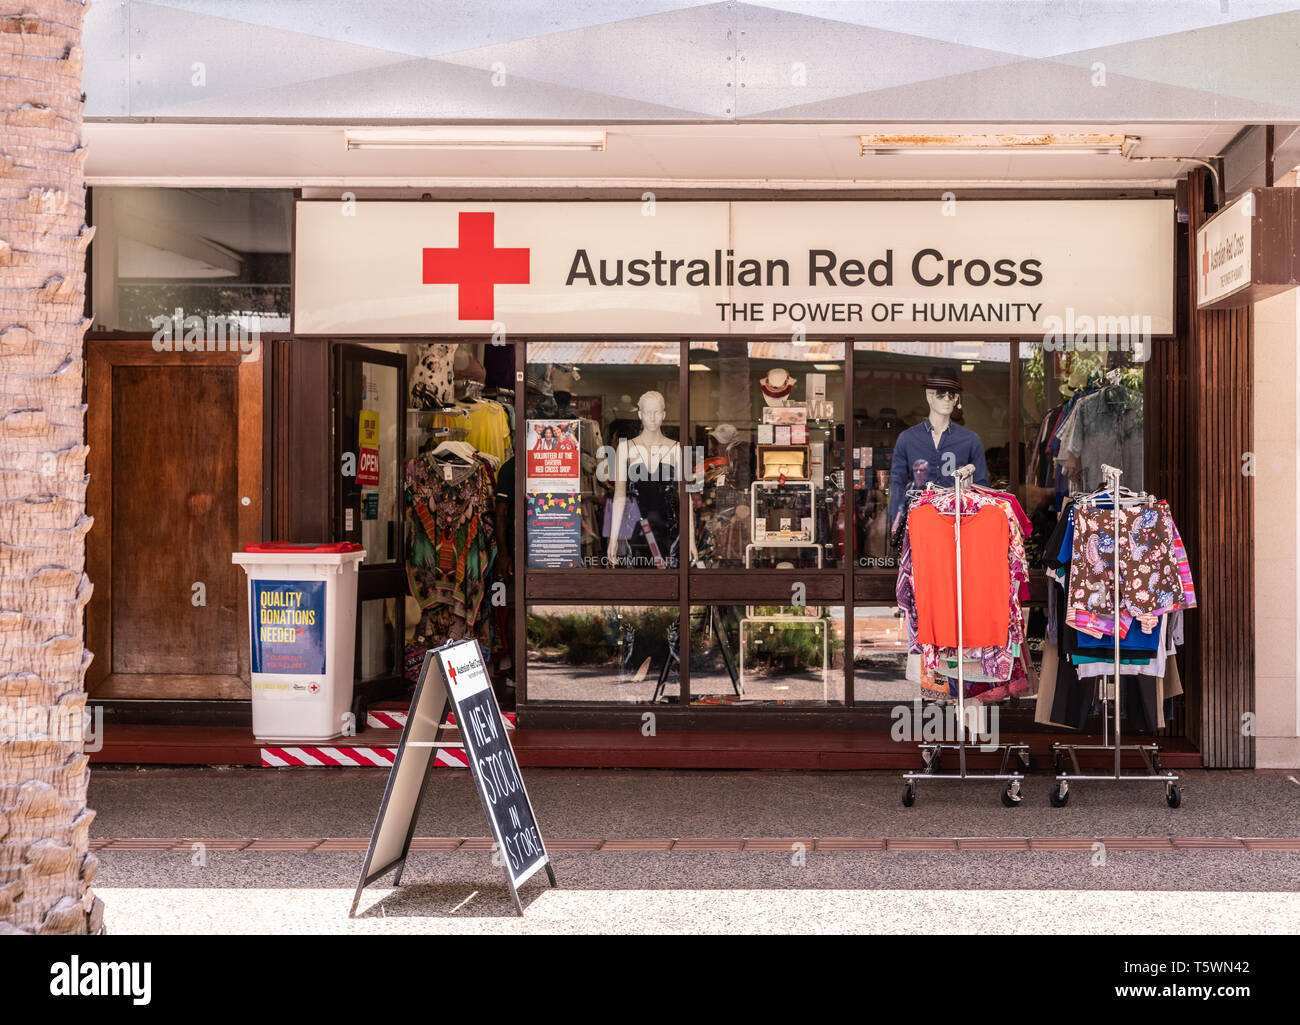 Darwin Australia - February 22, 2019: Australian Red Cross merchandise shop downtown displays clothing and other stuff in window. Stock Photo